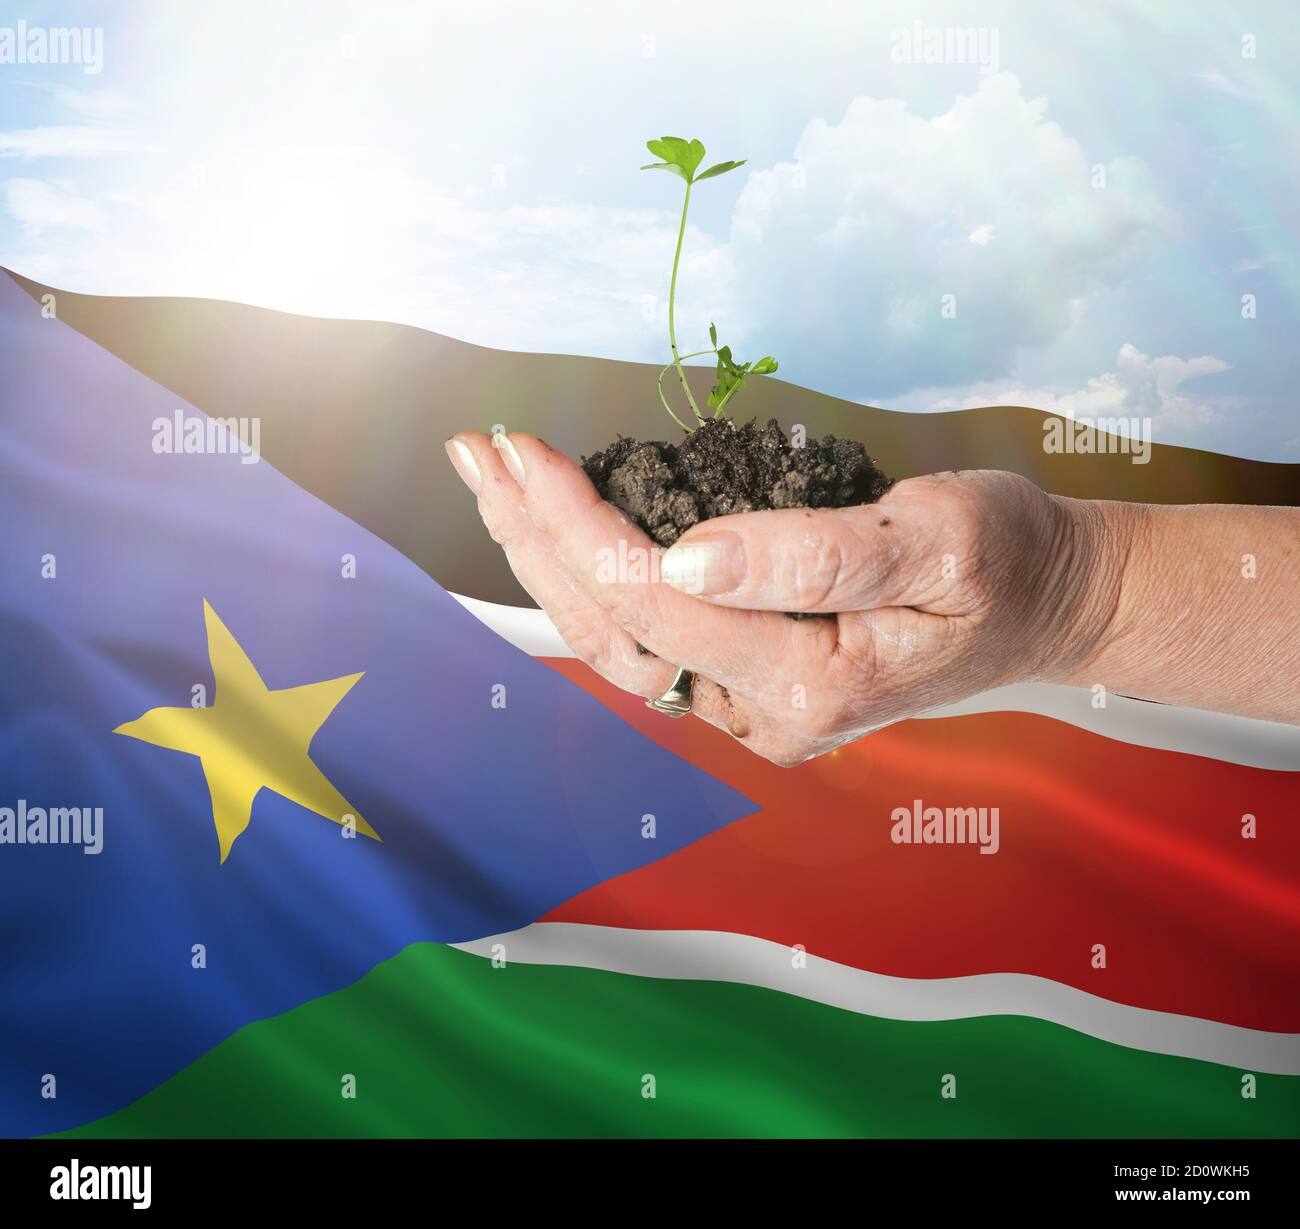 South Sudan growth and new beginning. Green renewable energy and ecology concept. Hand holding young plant. Stock Photo